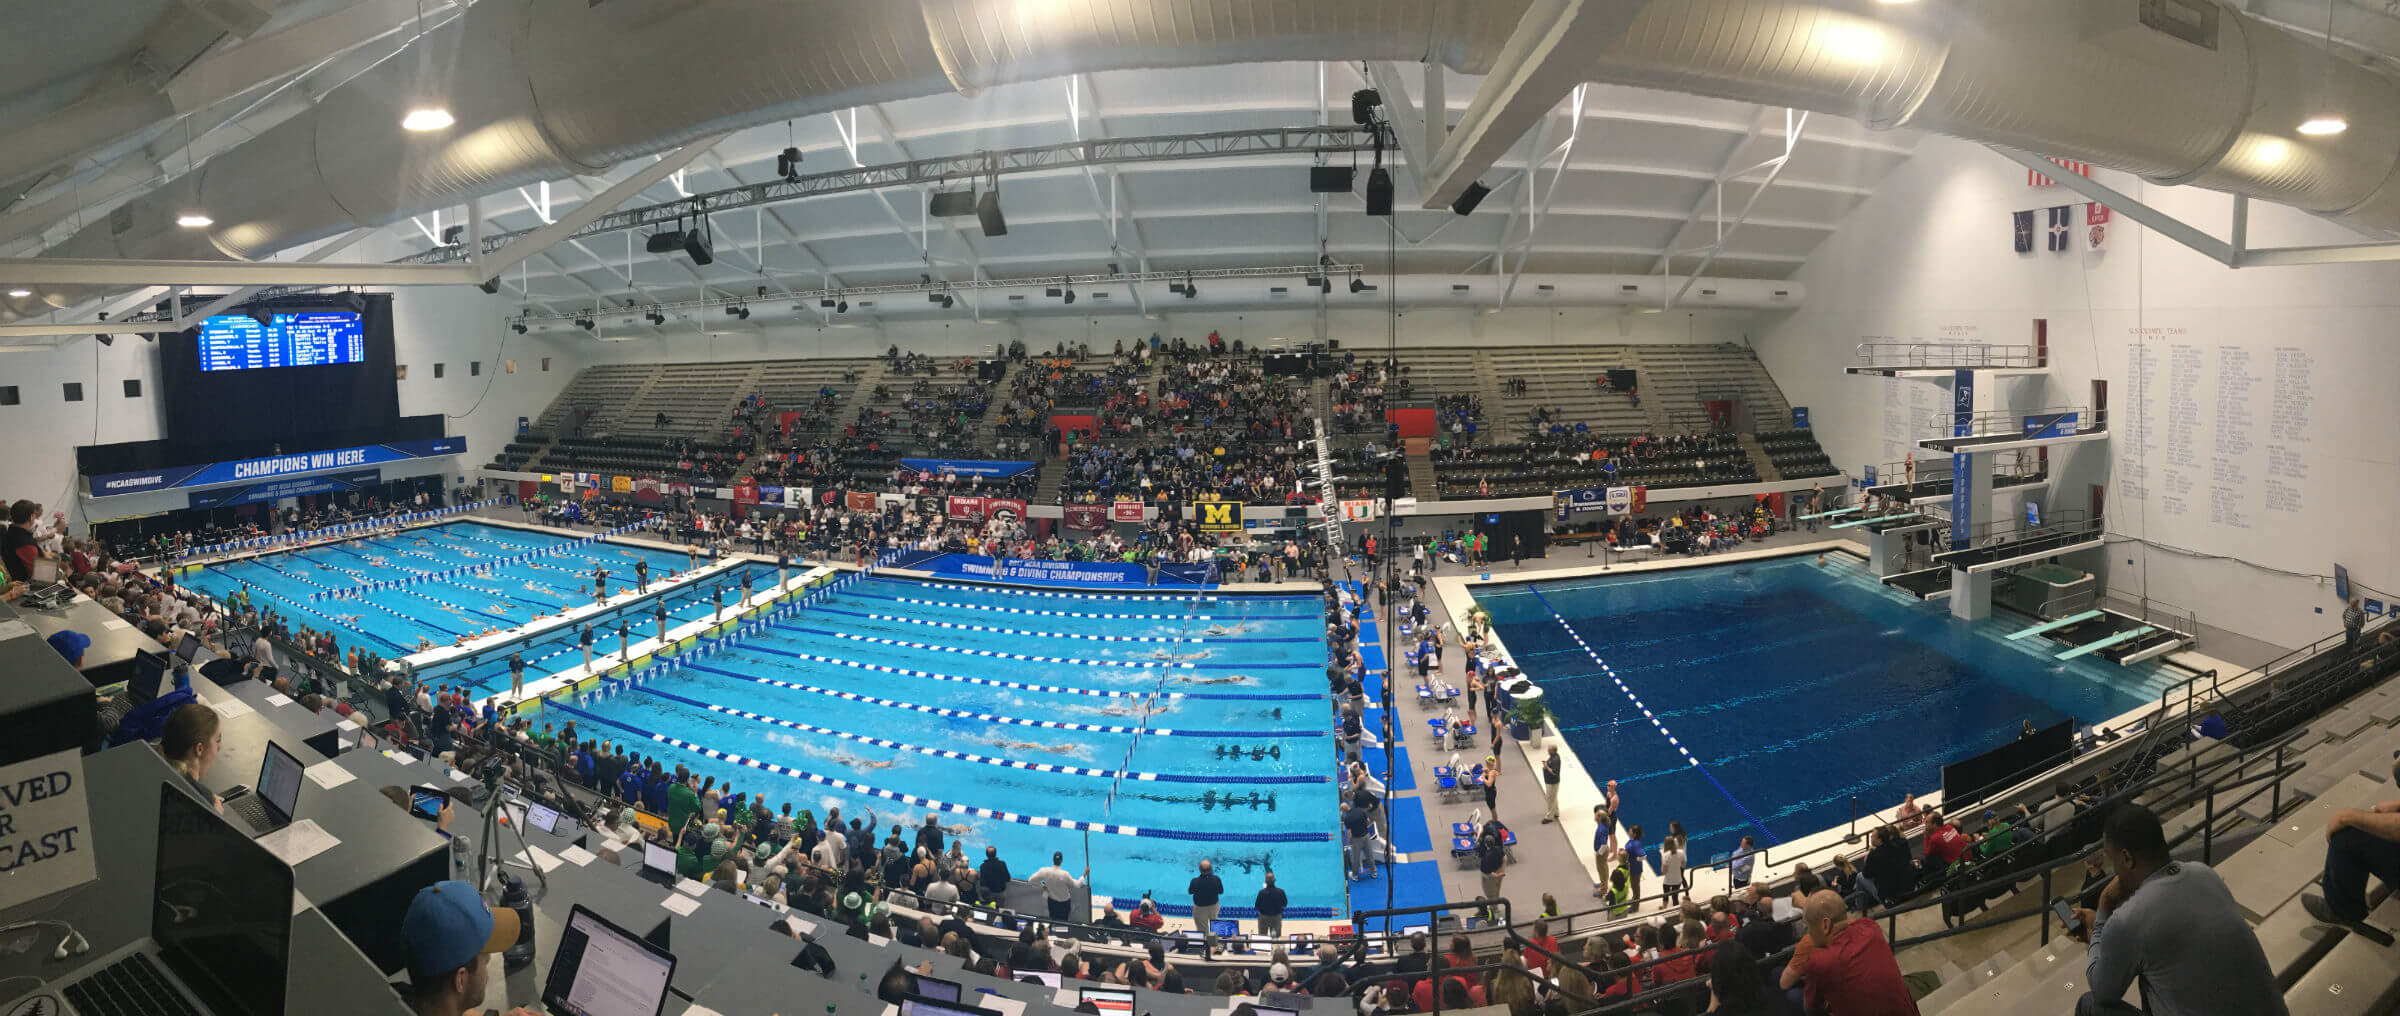 Quick Links to 2017 NCAA D1 Live Stream, Heat Sheets, Results, and More!